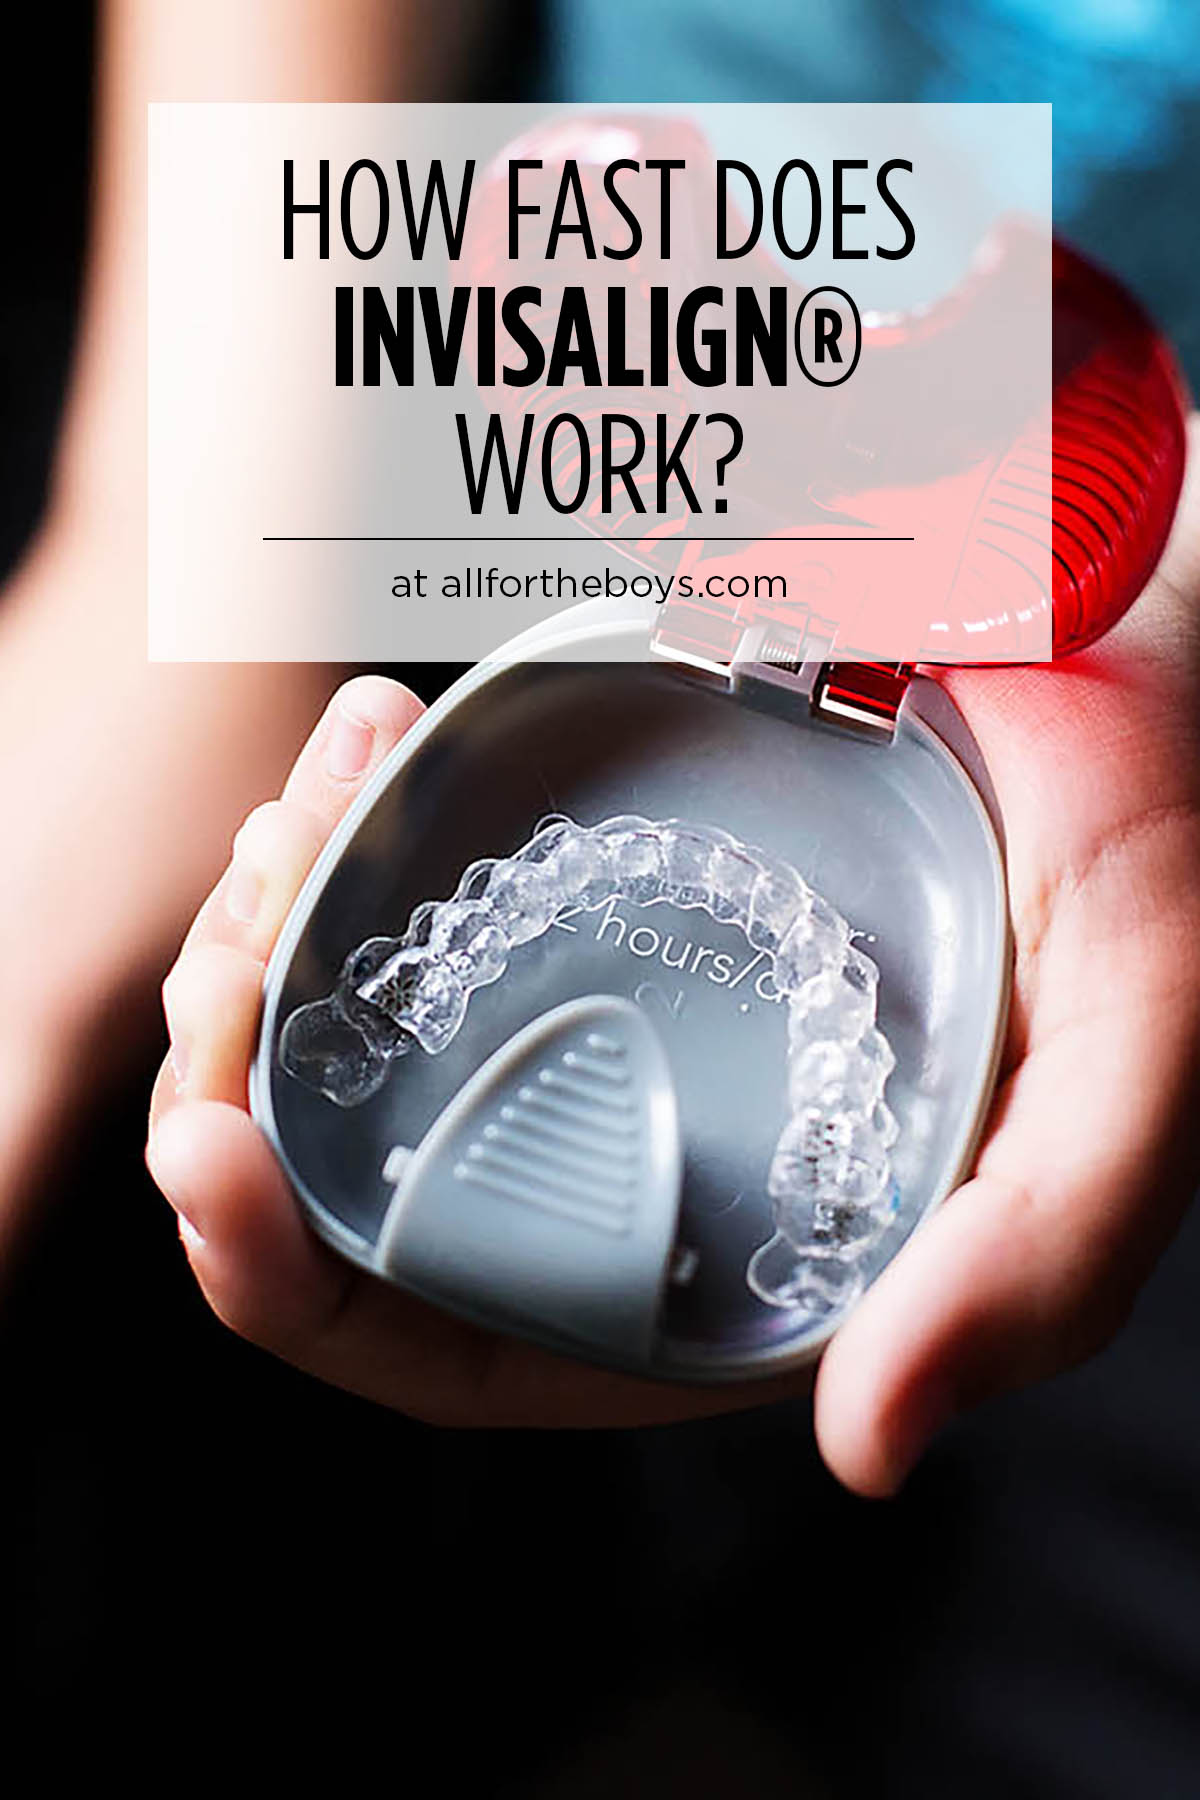 How fast does Invisalign work?